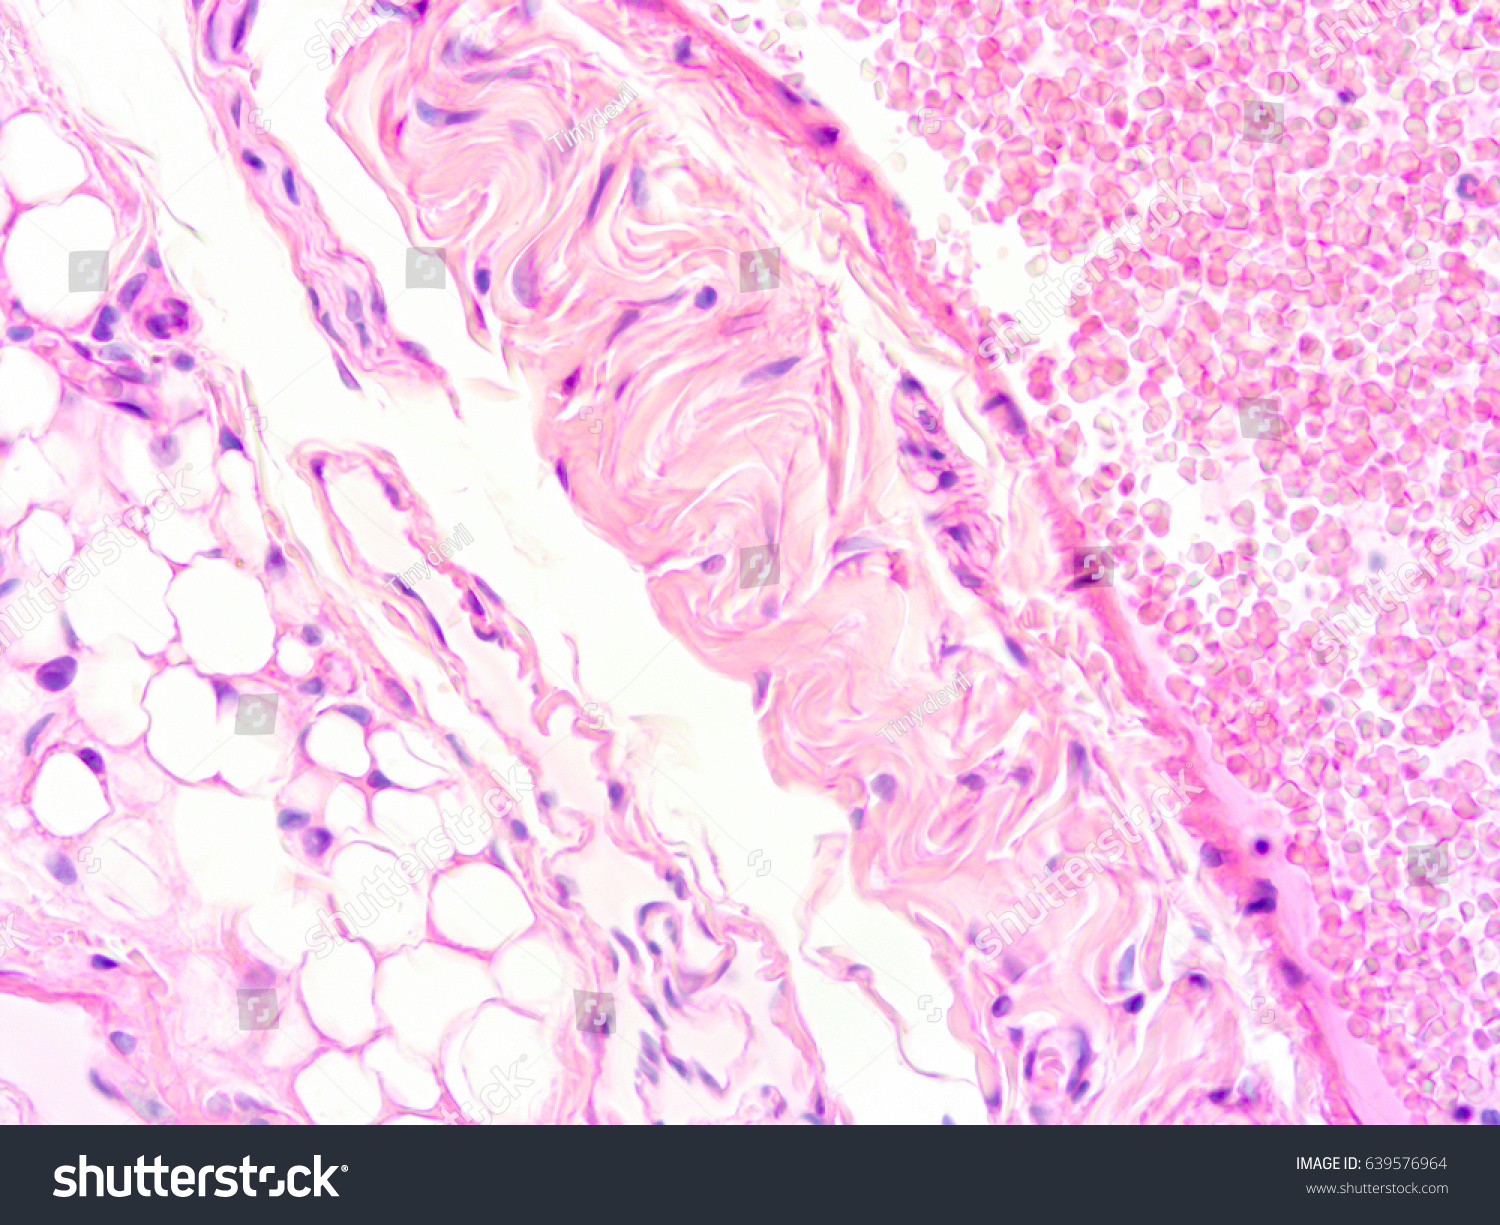 Histology Muscle and Connective Tissue